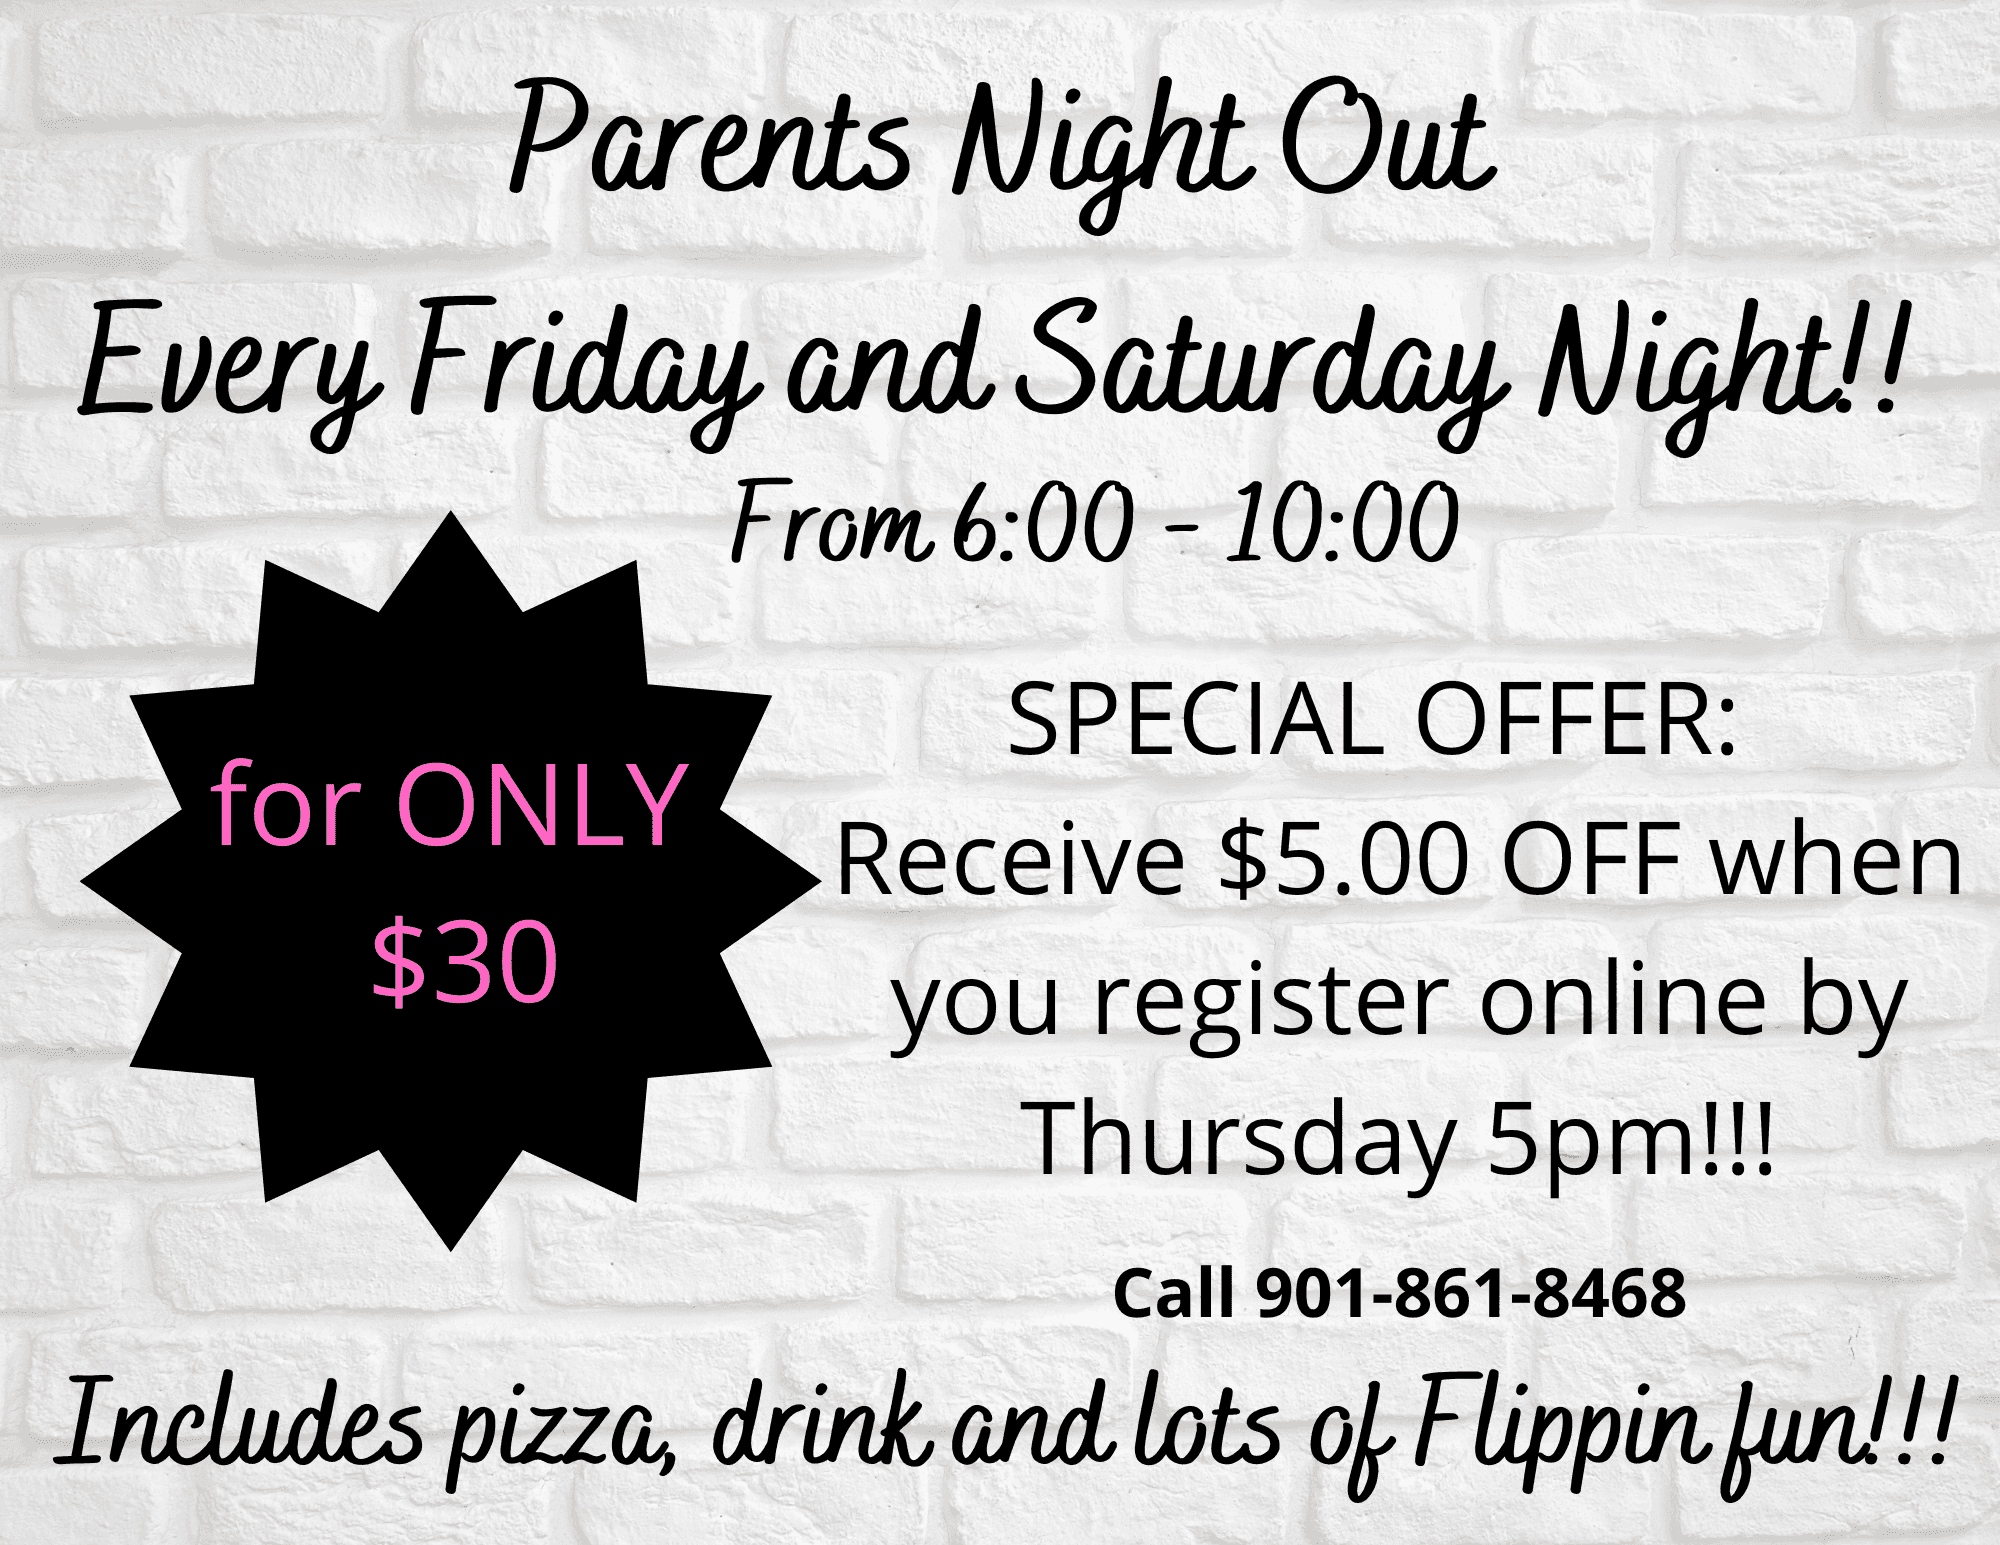 Parent's Night Out Flyer